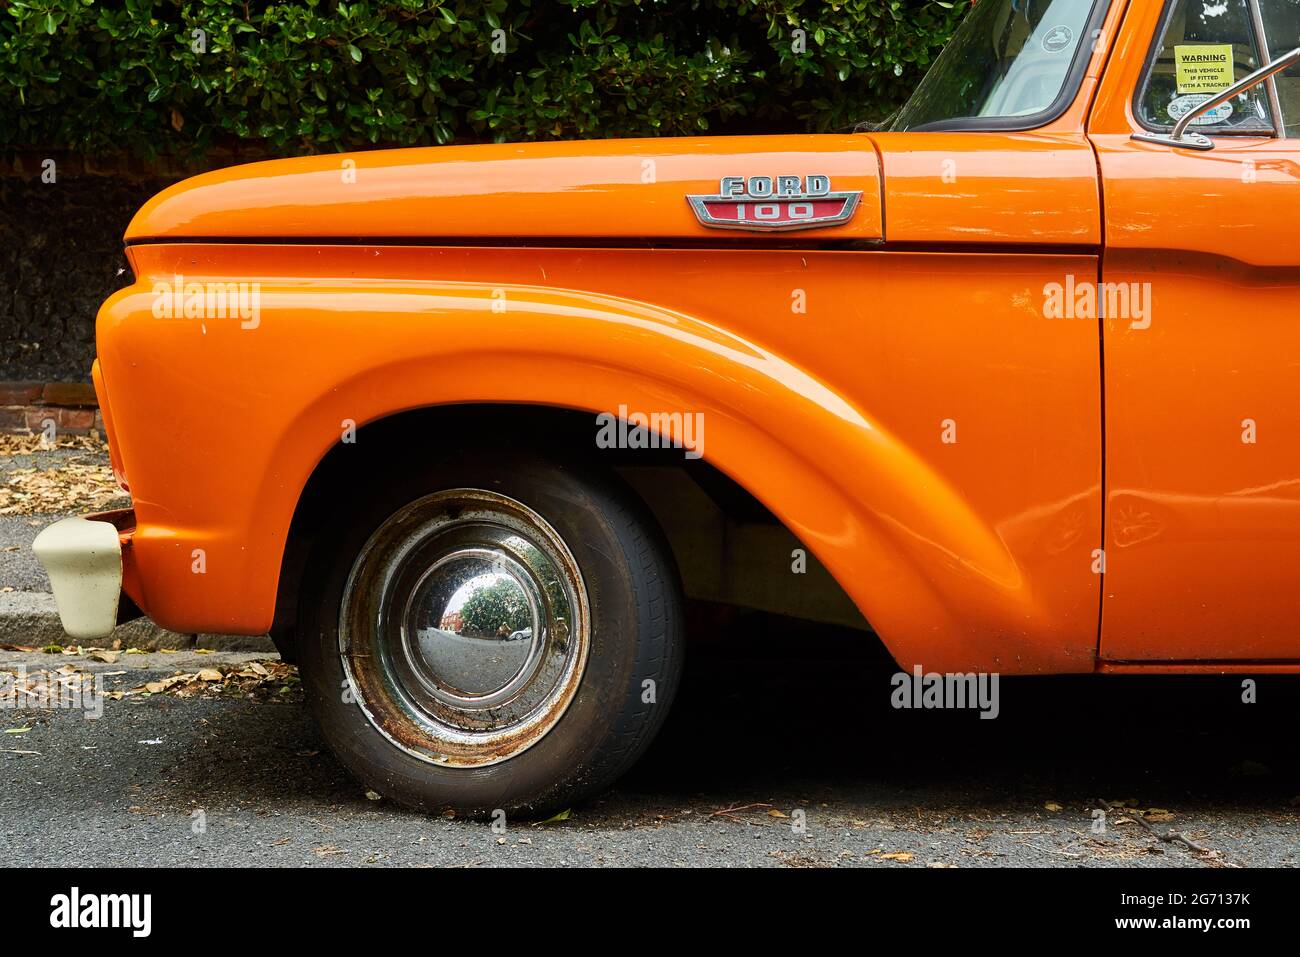 Ramsgate, United Kingdom - June 29, 2021: Front wheel arch of a mid sixties orange Ford F100 Pickup Truck Stock Photo